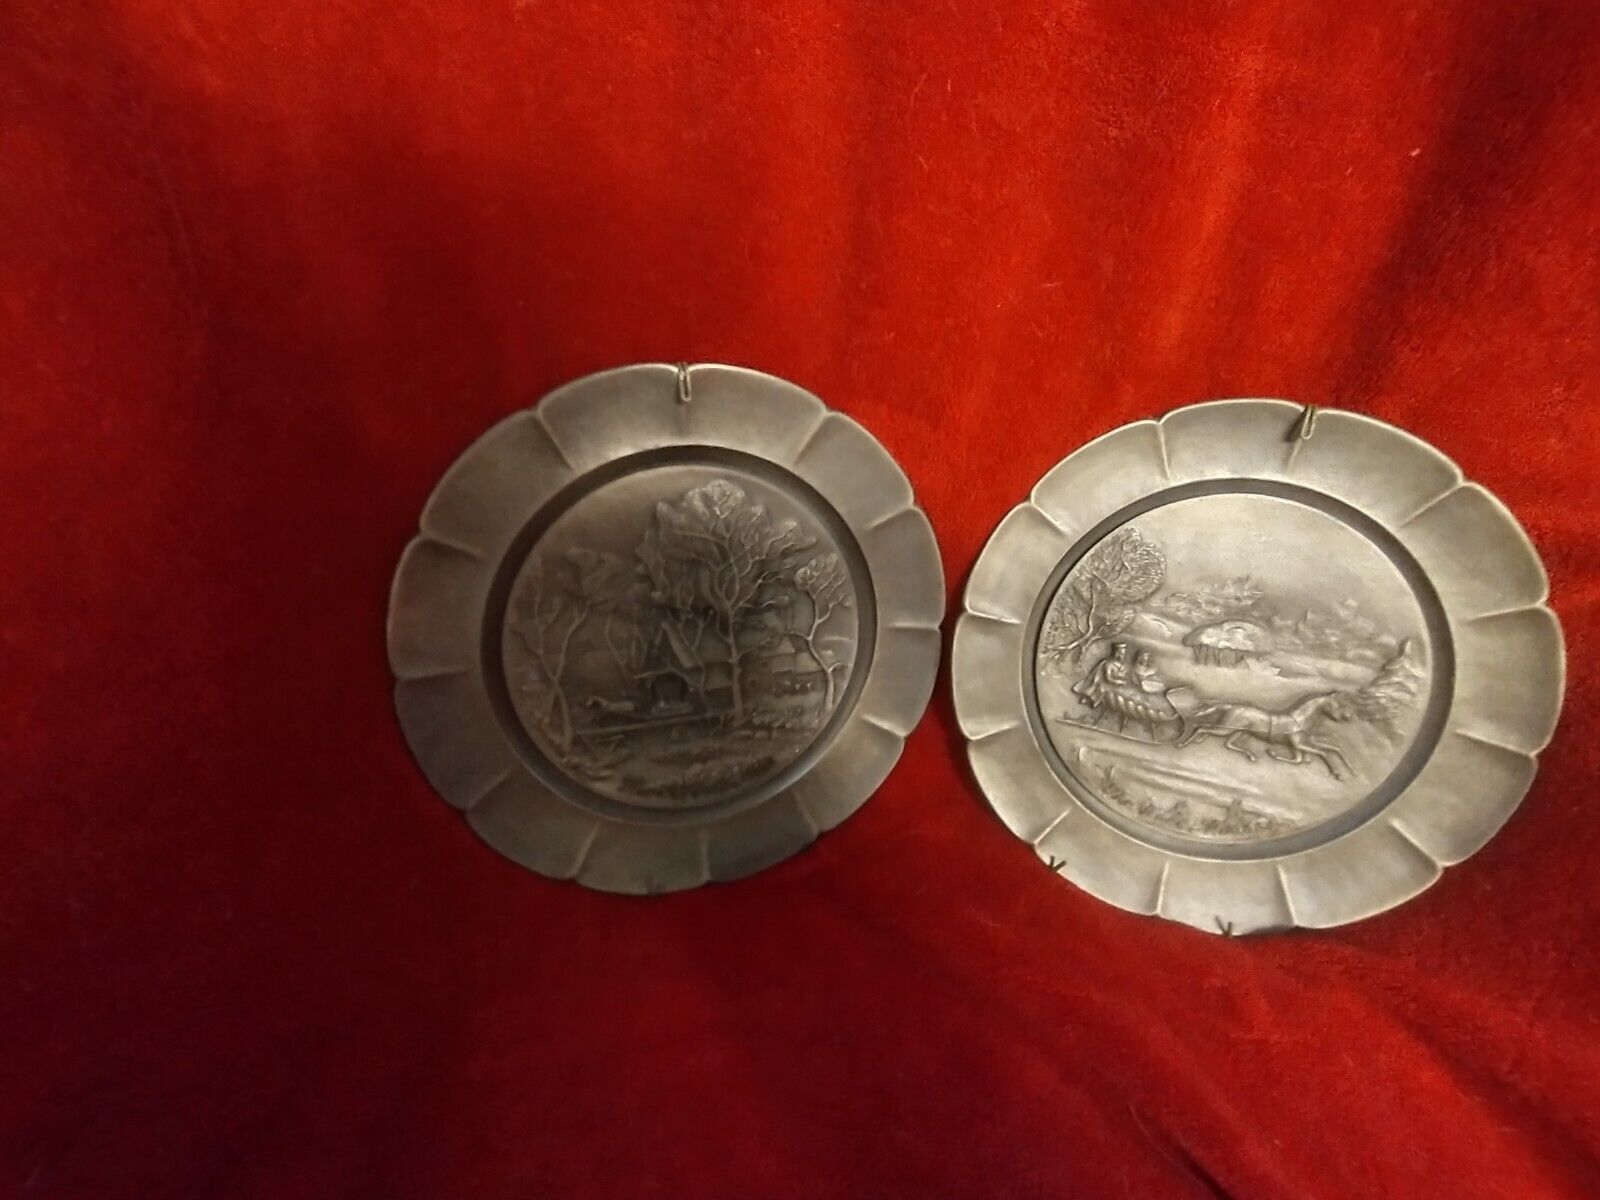 Lot of 2 Currier & Ives, Worcester Pewter Collectors Plates Grist Mill, Winter - $27.67